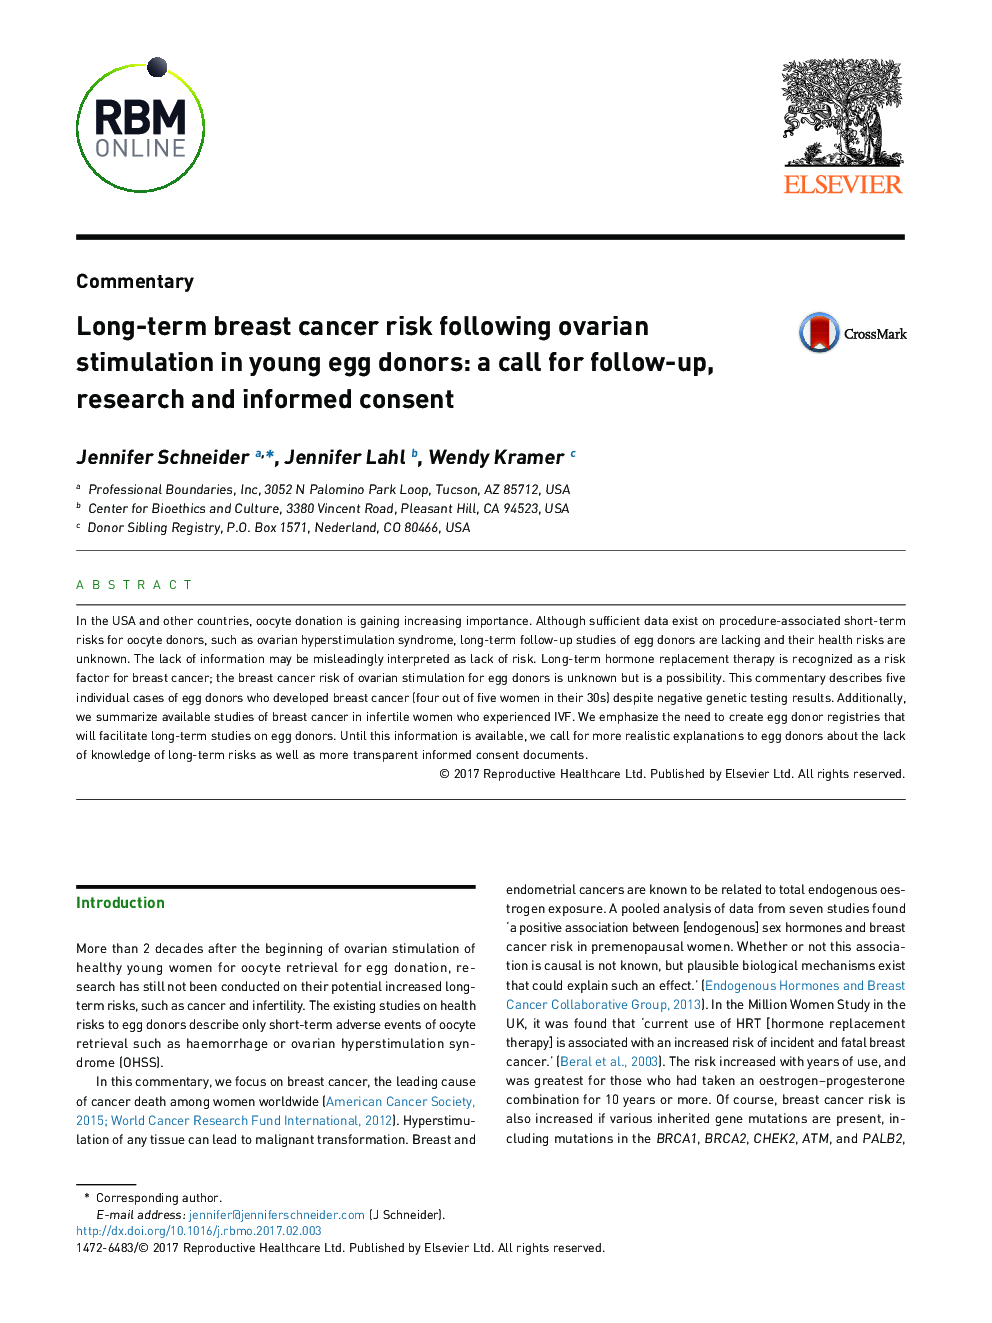 Long-term breast cancer risk following ovarian stimulation in young egg donors: a call for follow-up, research and informed consent